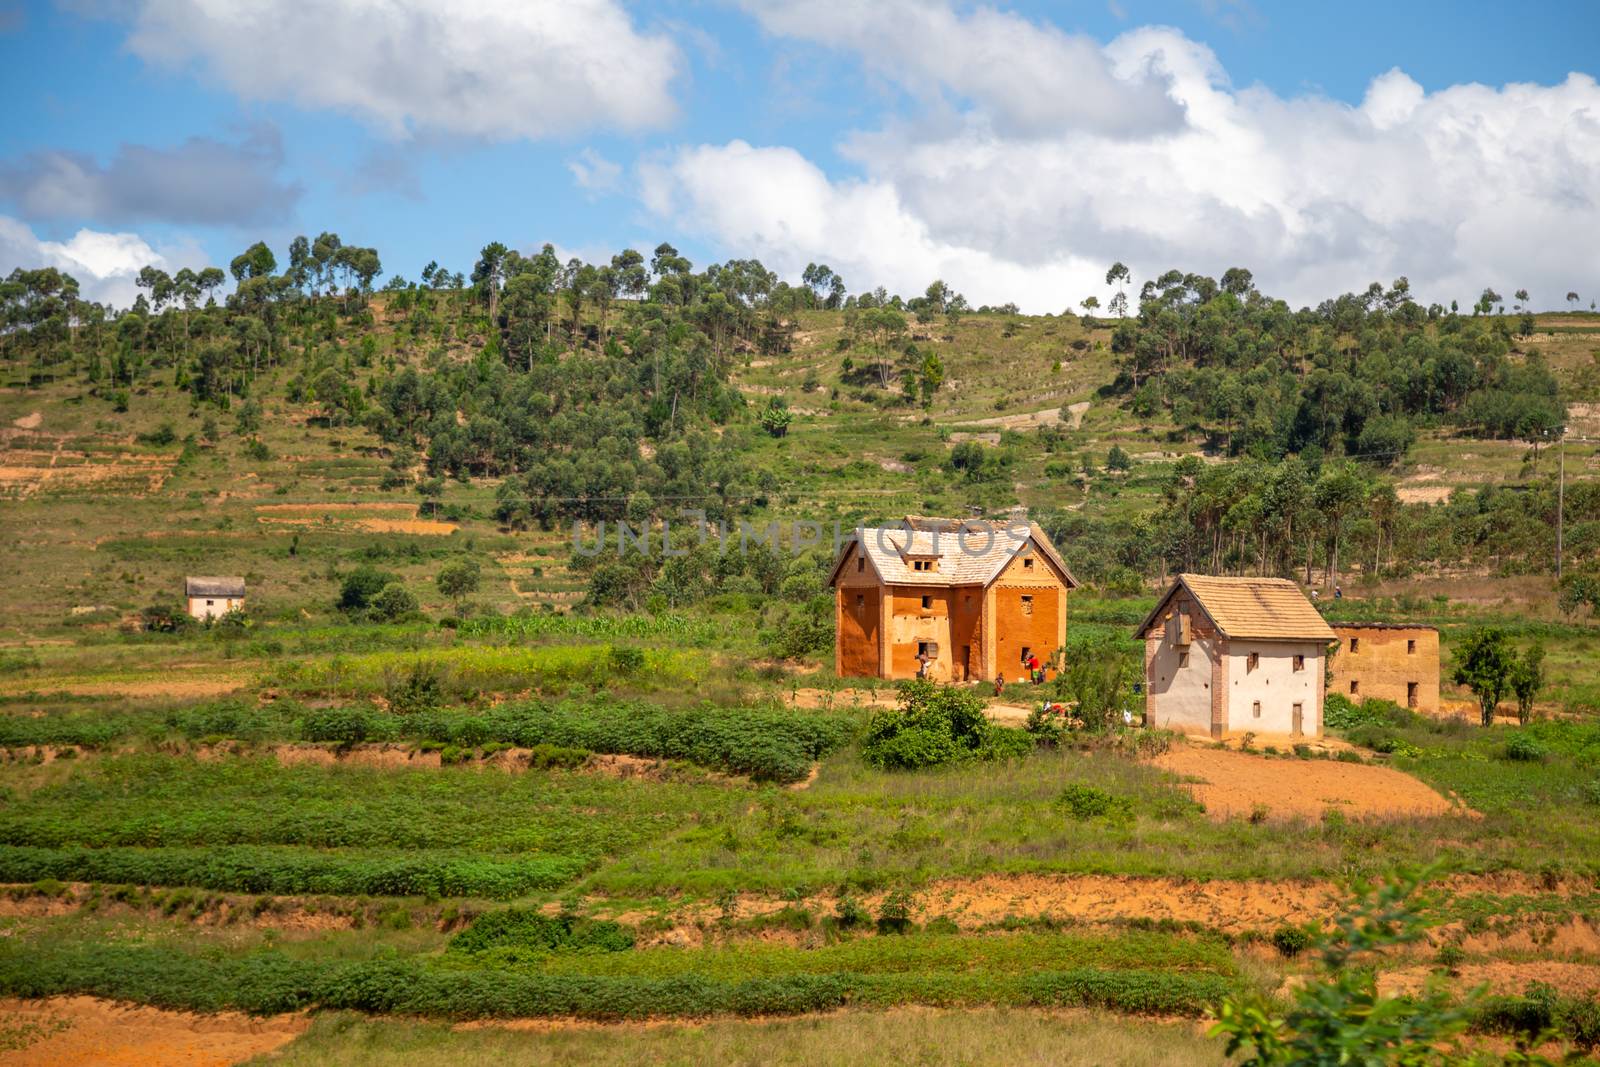 The homes of locals on the island of Madagascar by 25ehaag6